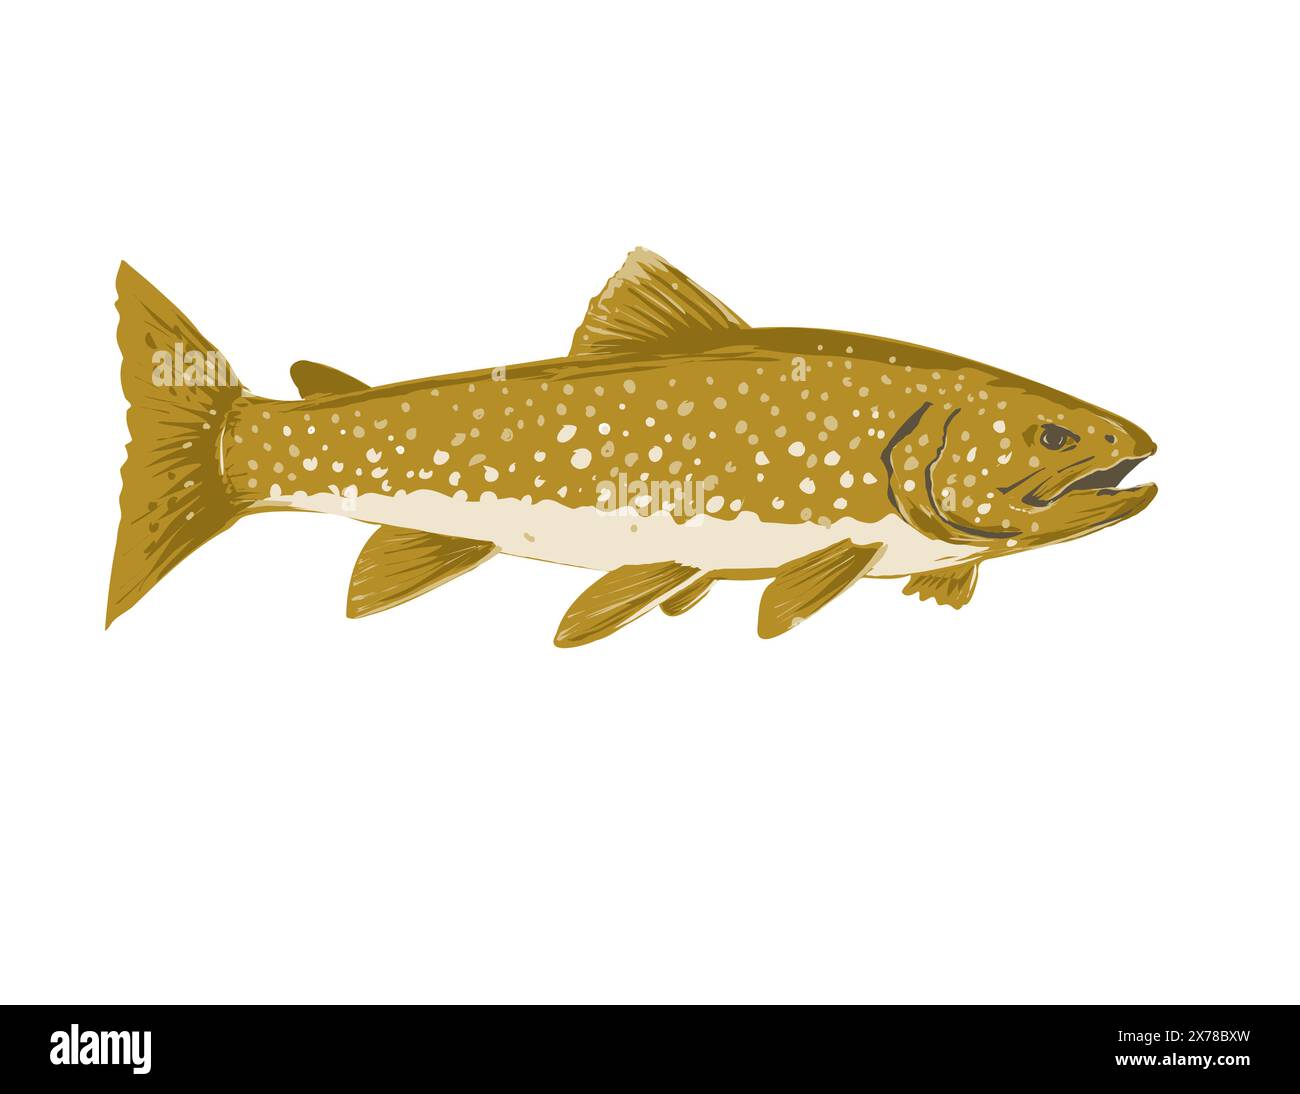 WPA poster art of a lake trout, Salvelinus namaycush, mackinaw, namaycush or lake char viewed from side done in works project administration style or Stock Vector